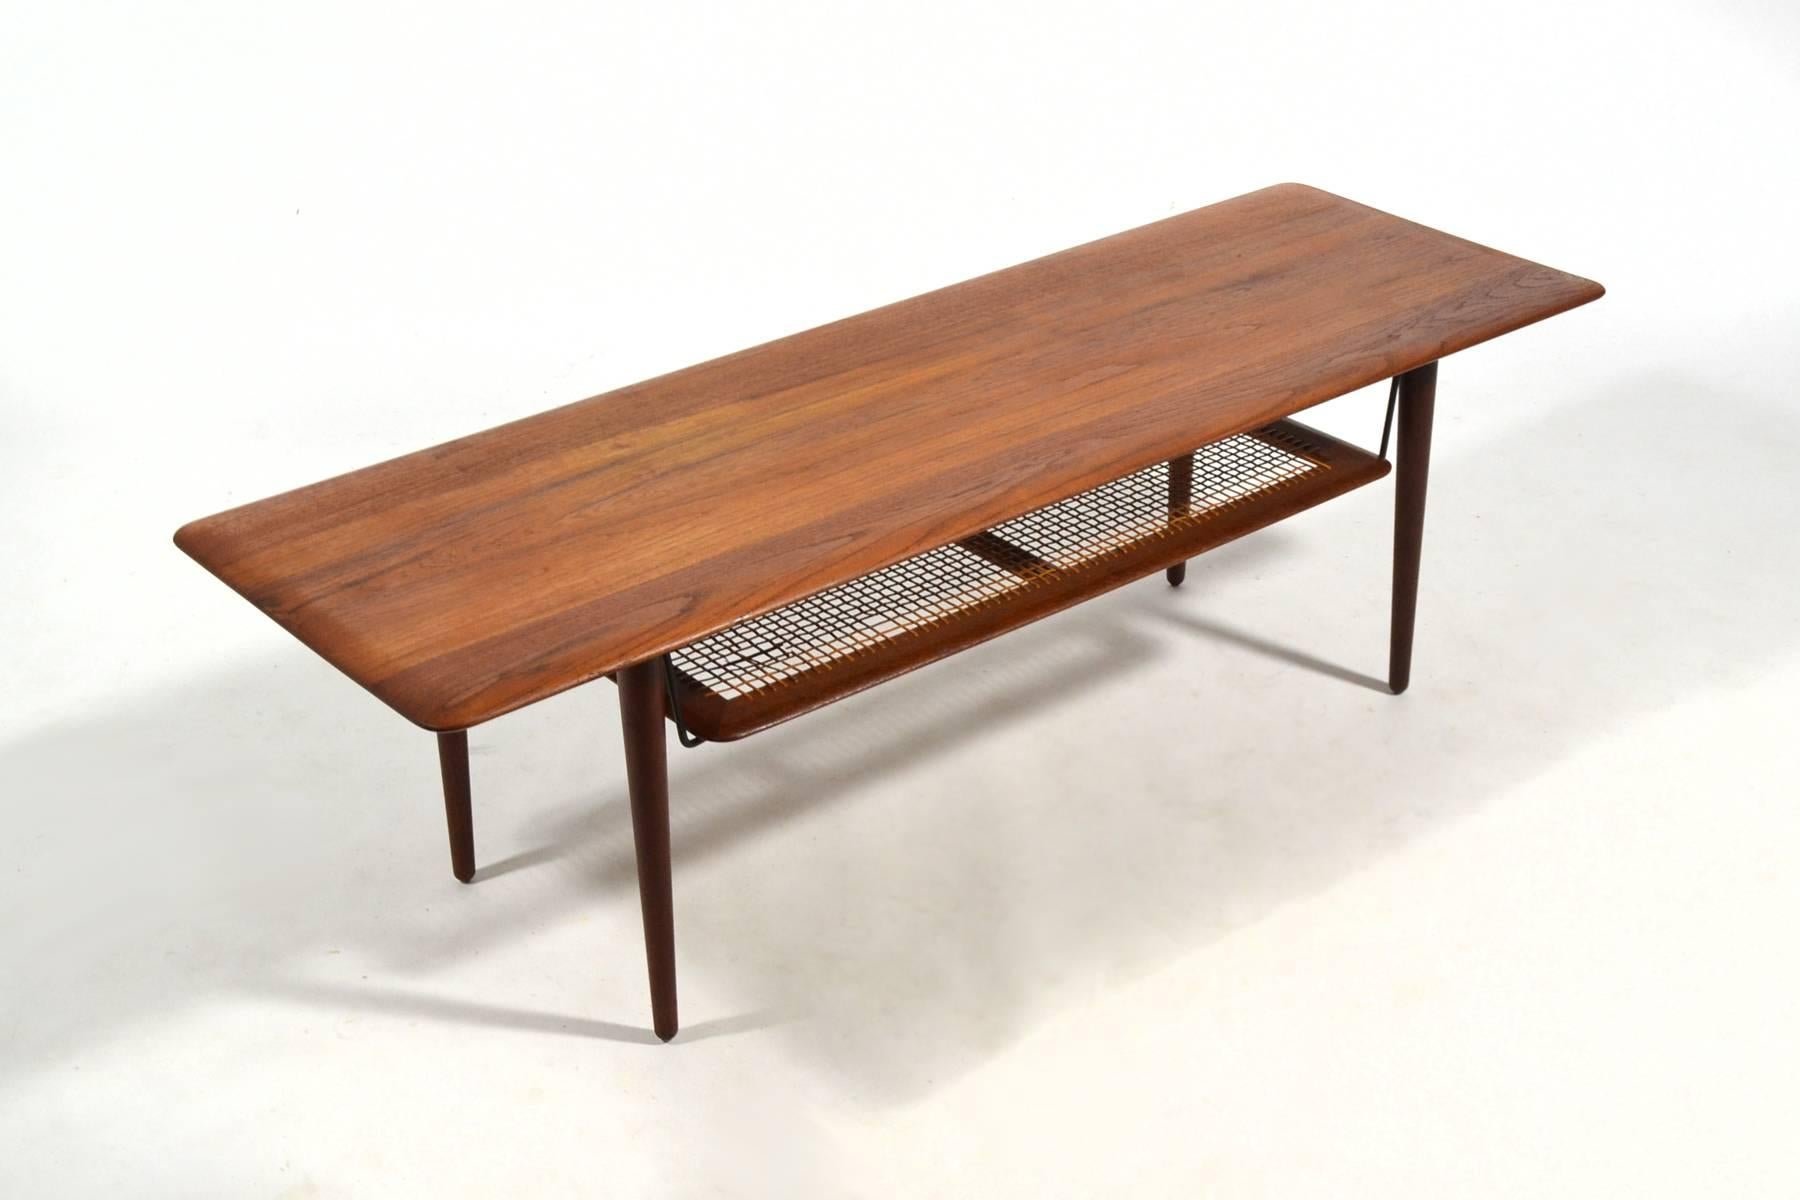 This beautiful model fd516 coffee table by Peter Hvidt & Orla Mølgaard Nielsen was designed in 1956 and is crafted of solid teak. Typical of the best Danish modern design, the excellent craftsmanship matches the refined details such as the tapered